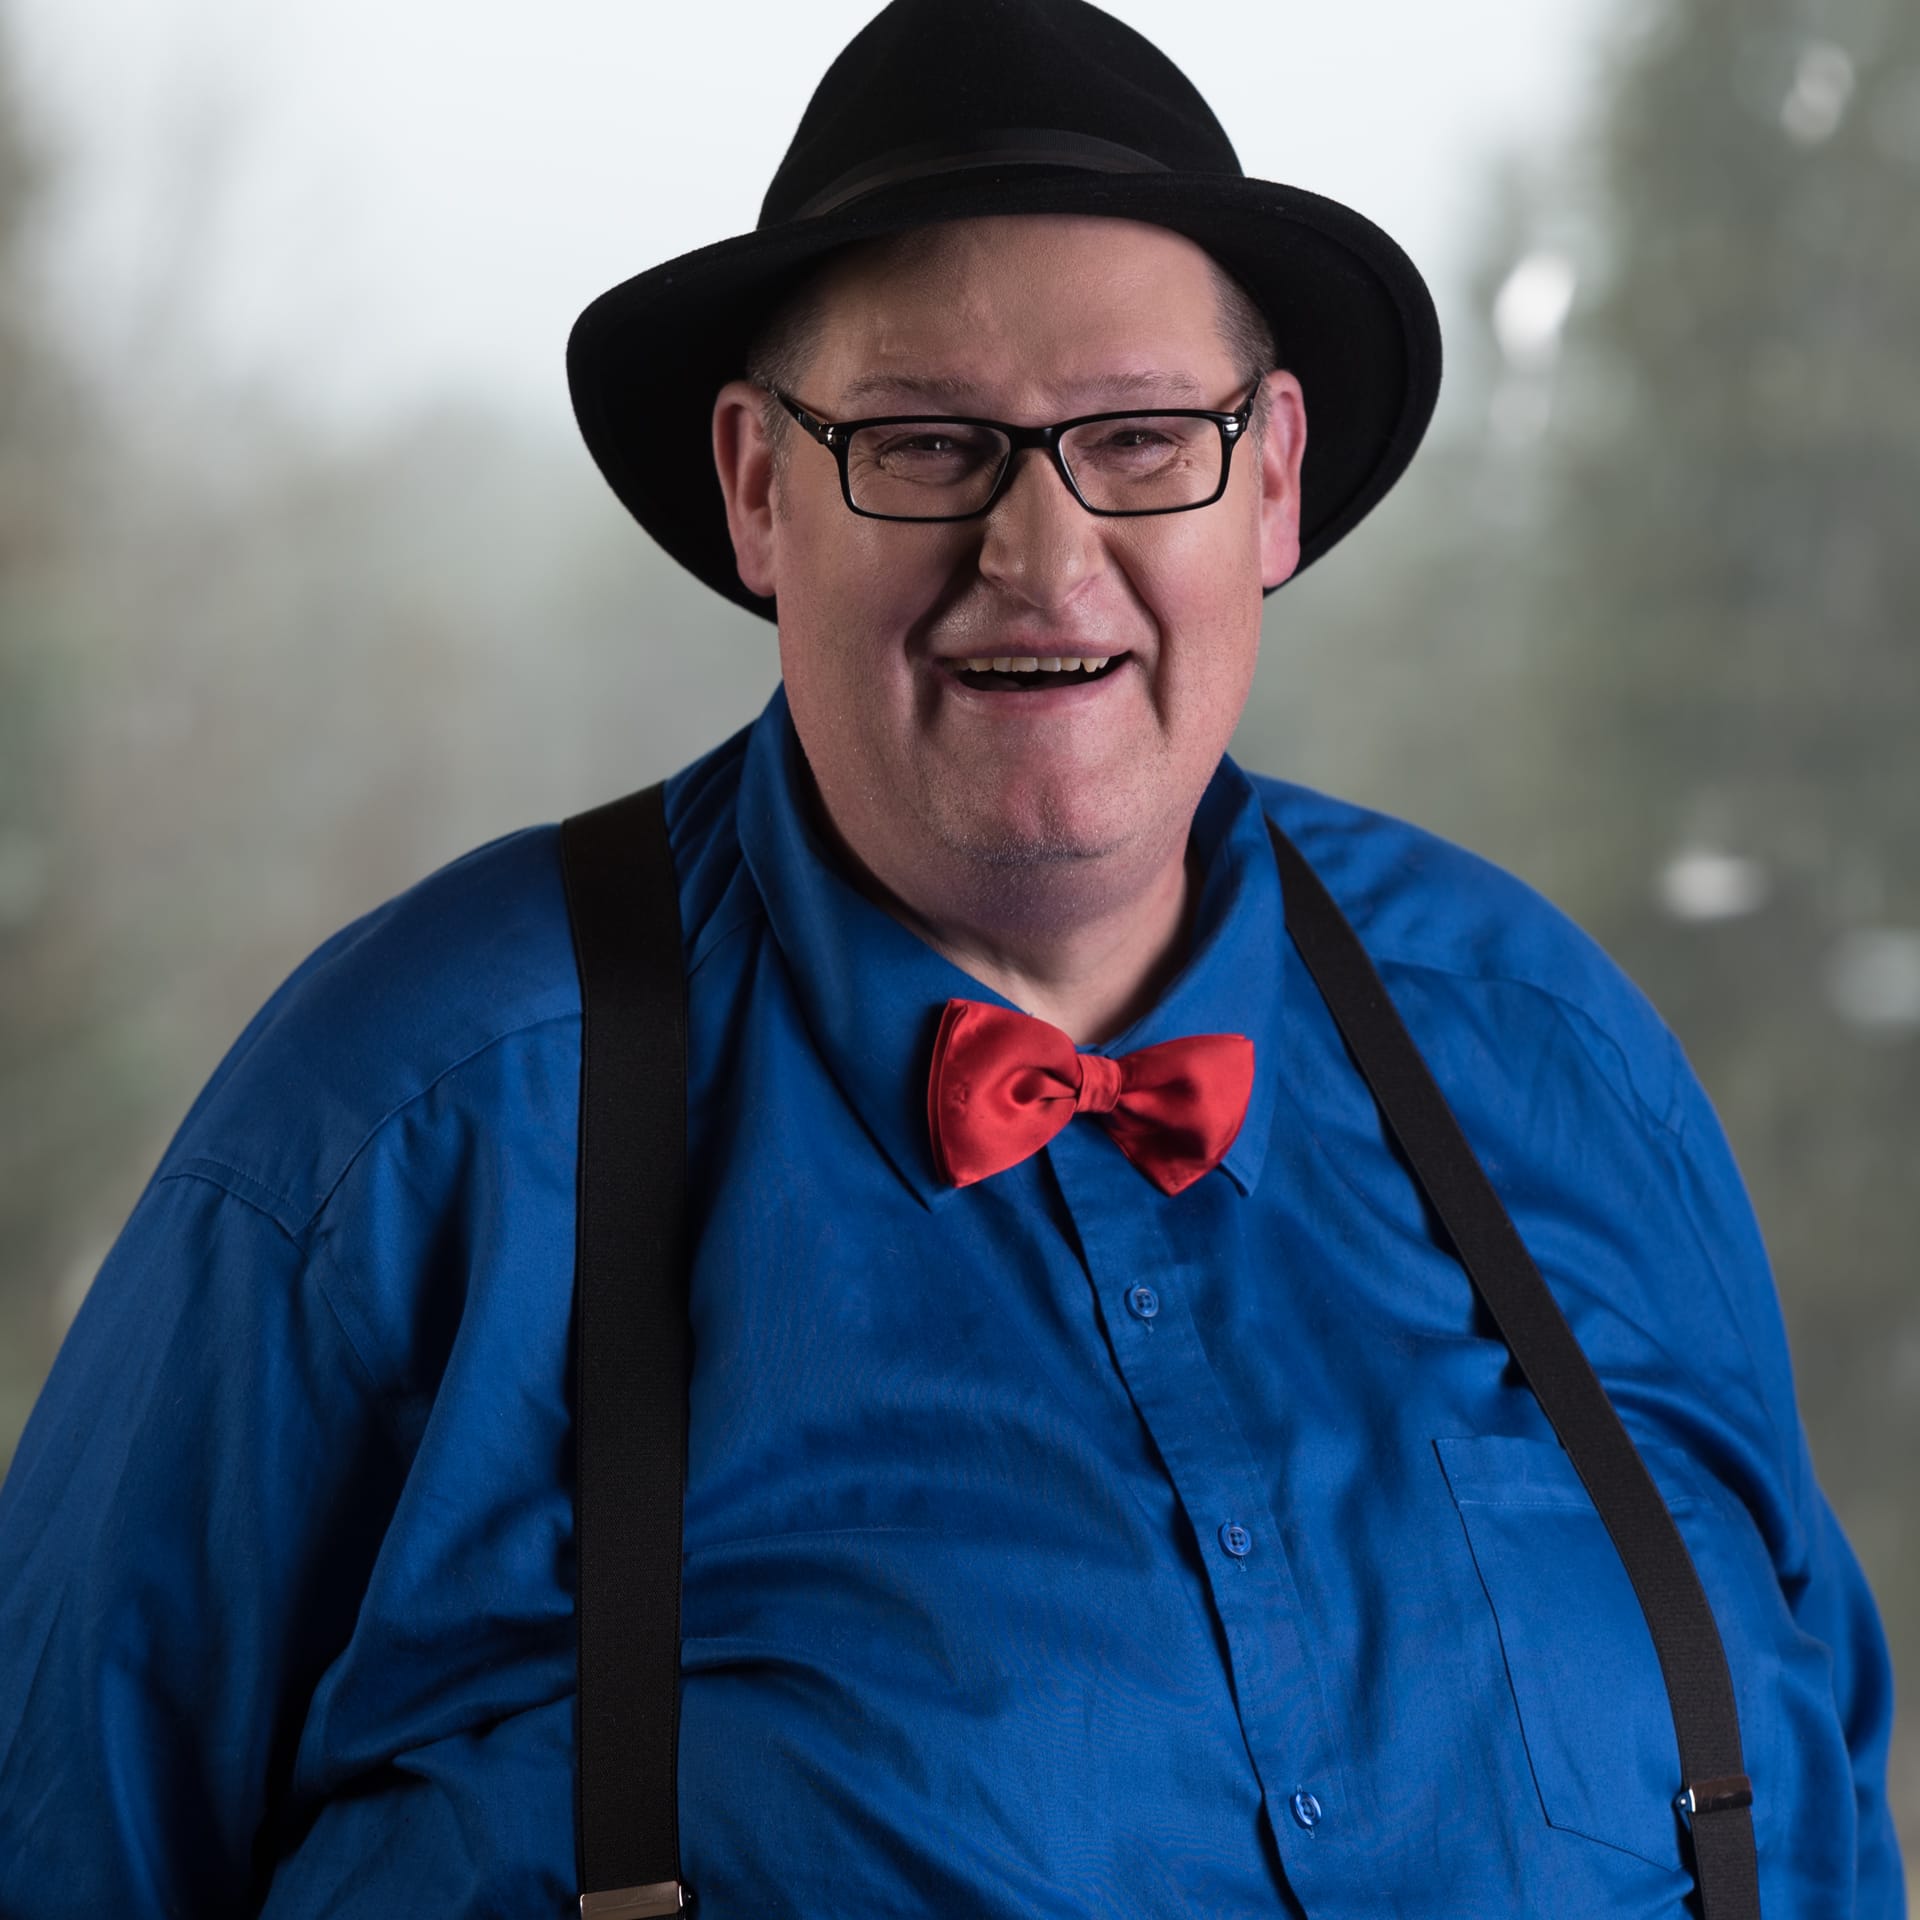 A cheerful man wearing a black hat, blue shirt, red bow tie, and suspenders, smiling at the camera with a blurred background.